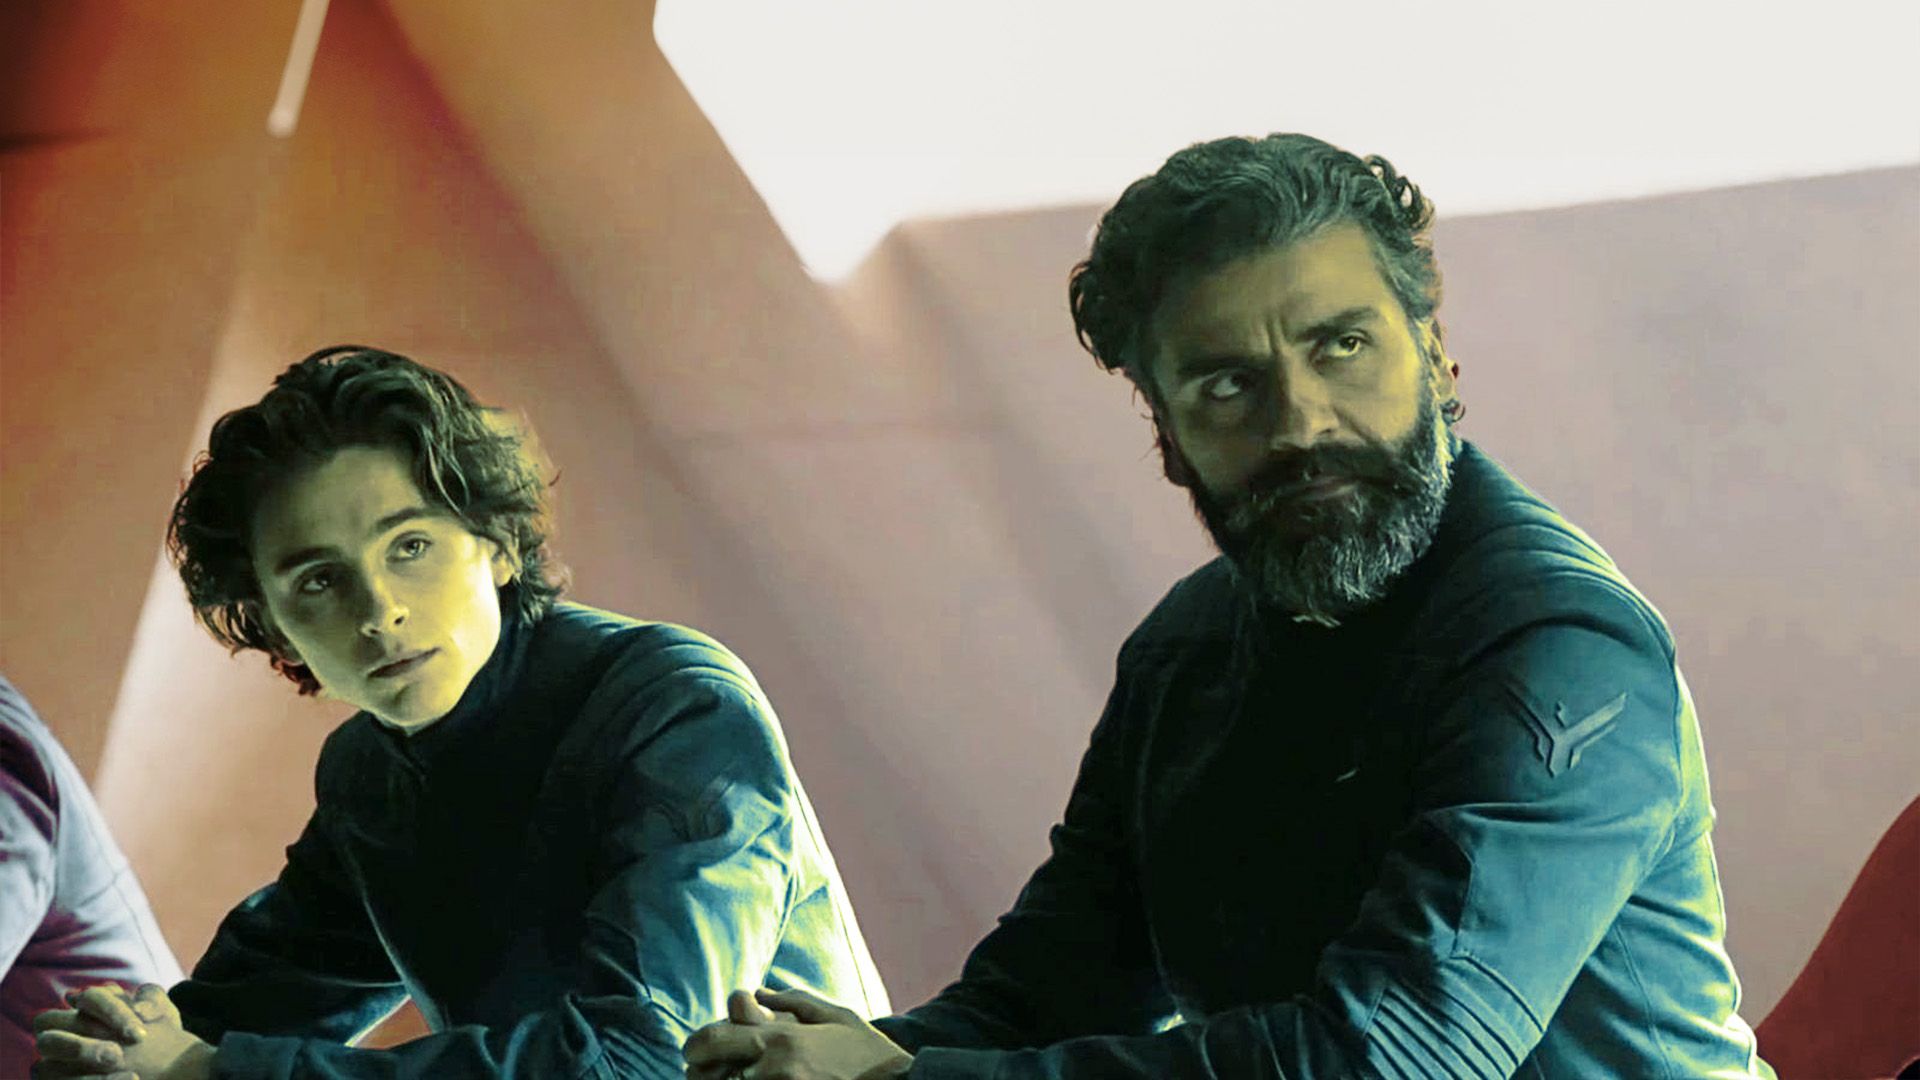 An edited image of Oscar Isaac as Leto Atreides and Timothee Chalamet as Paul Atreides at a meeting in Dune